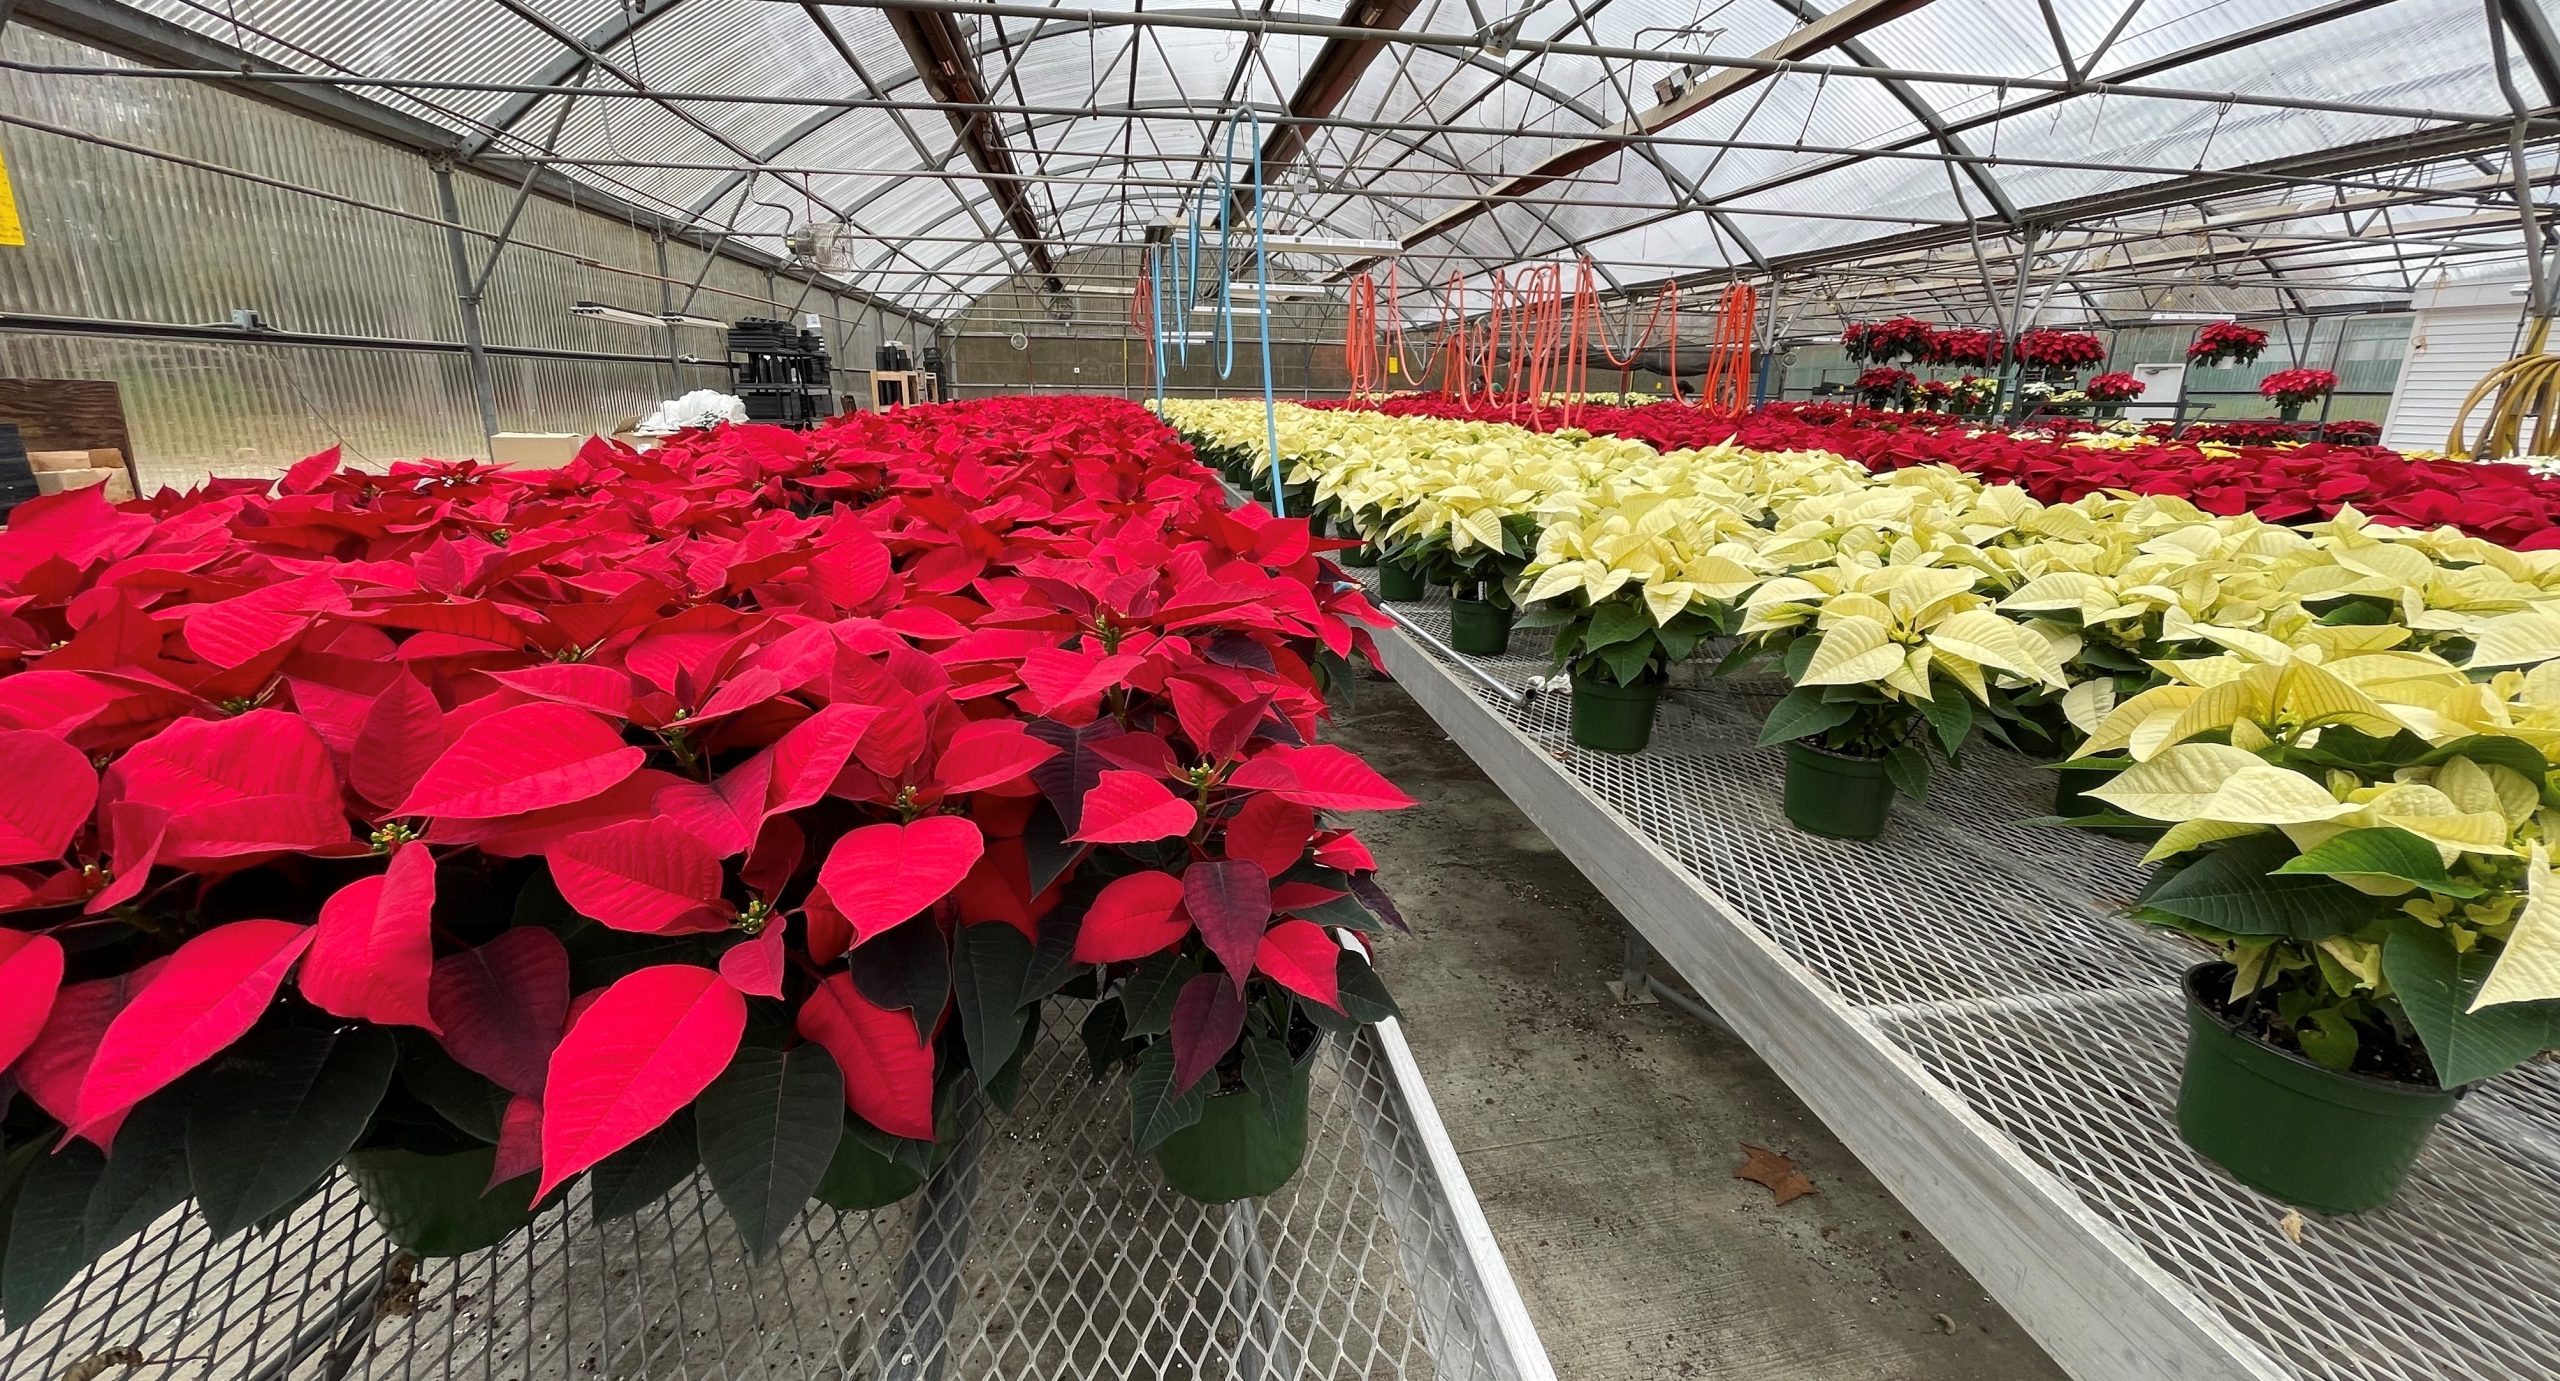 Poinsettias - red, white and other colors - cover tables inside the greenhouse at DHSS' Herman Holloway Campus